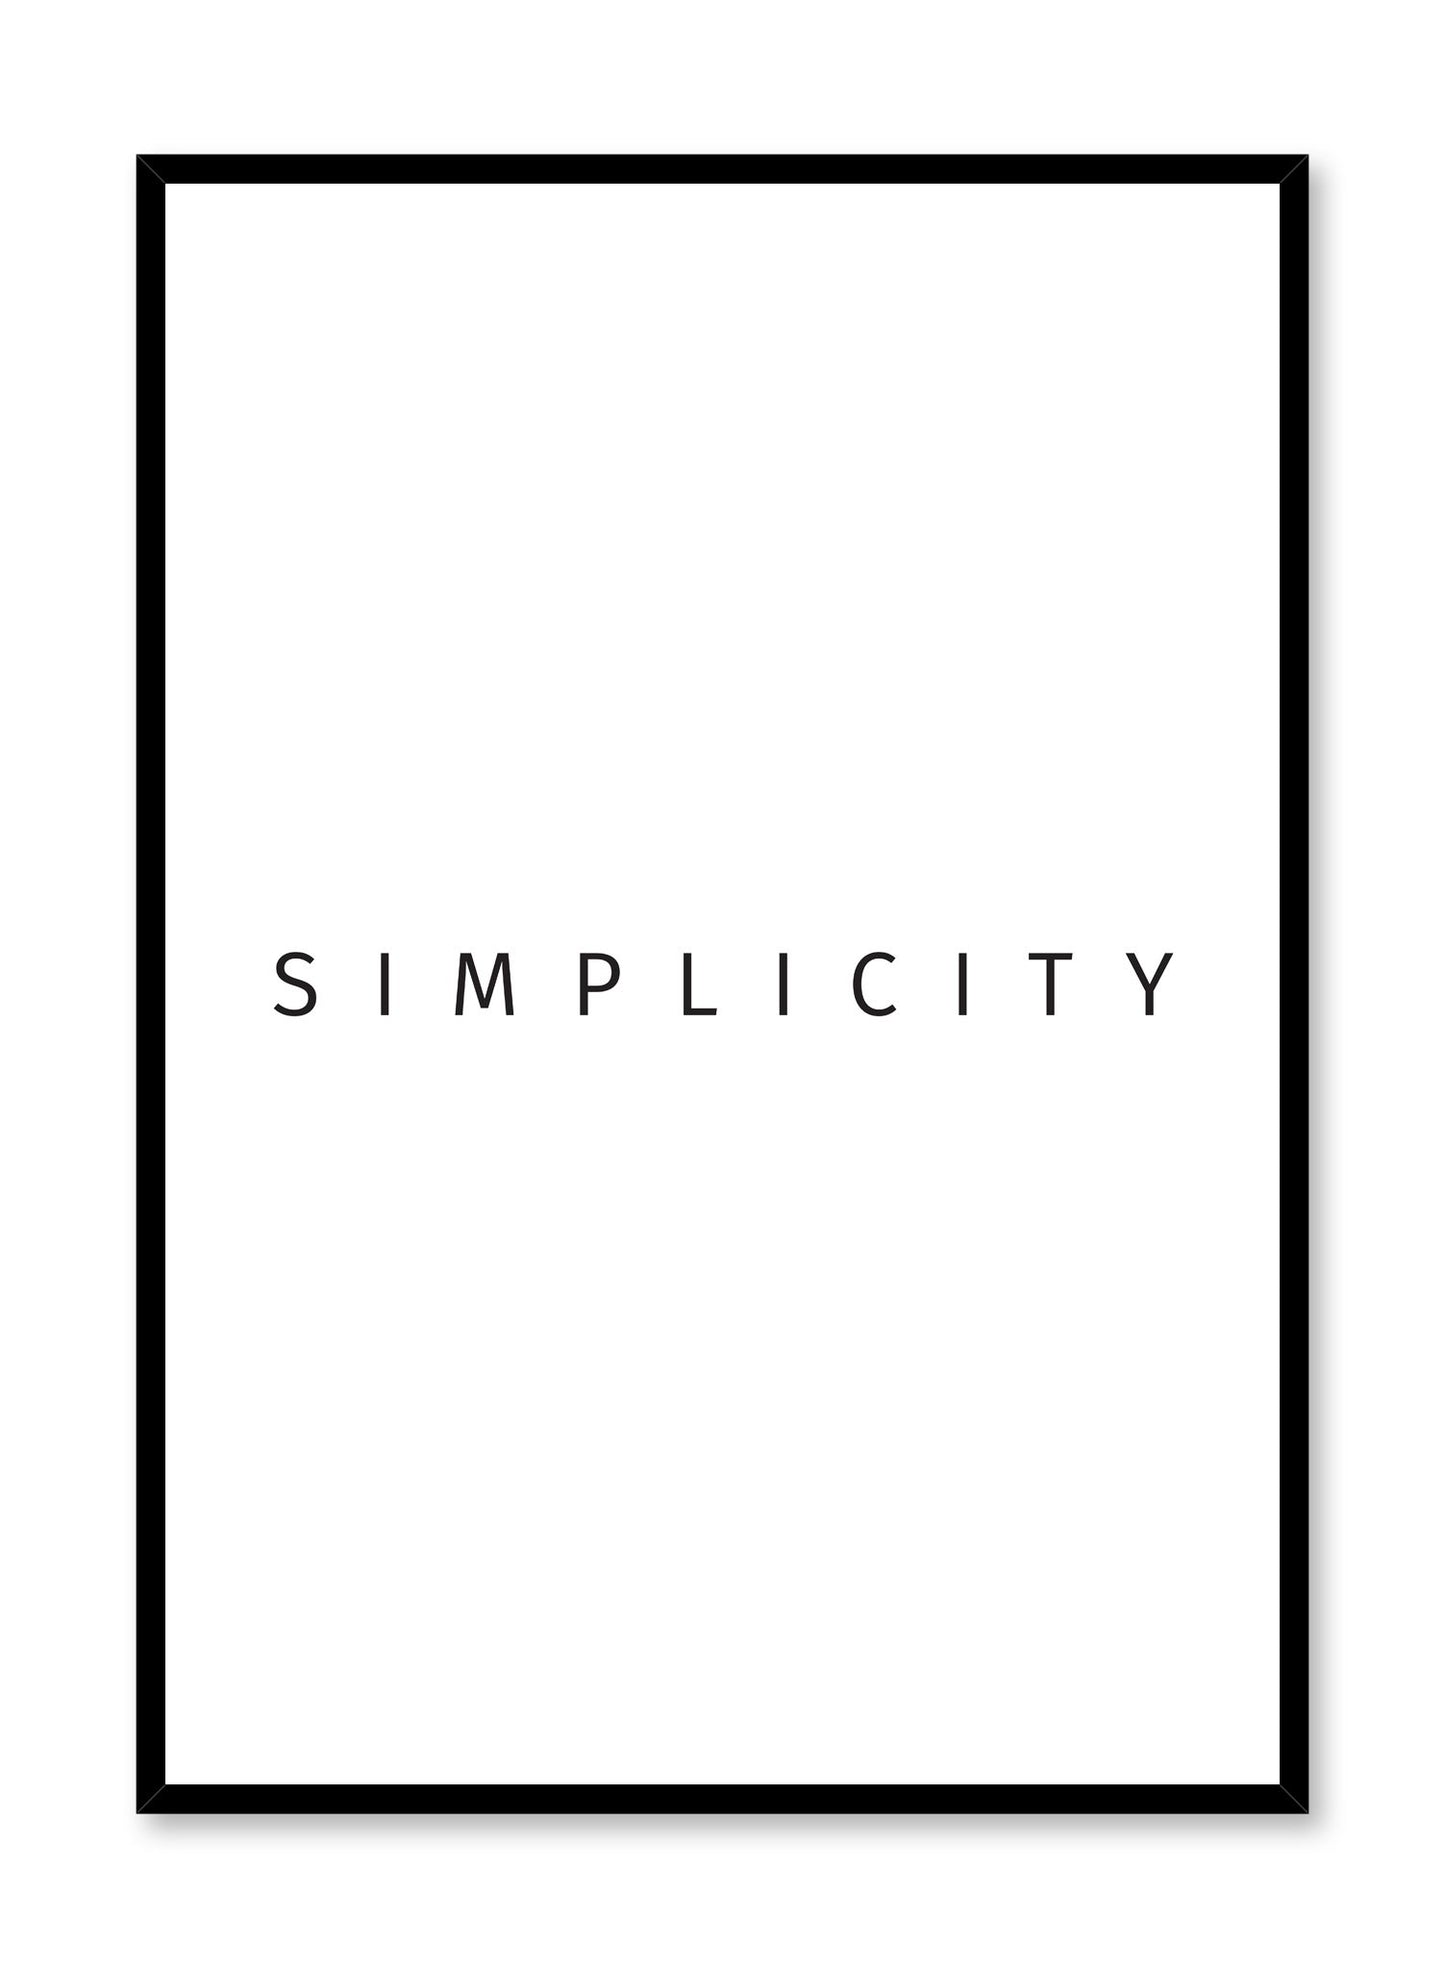 Modern minimalist art print by Opposite Wall with graphic simplicity design